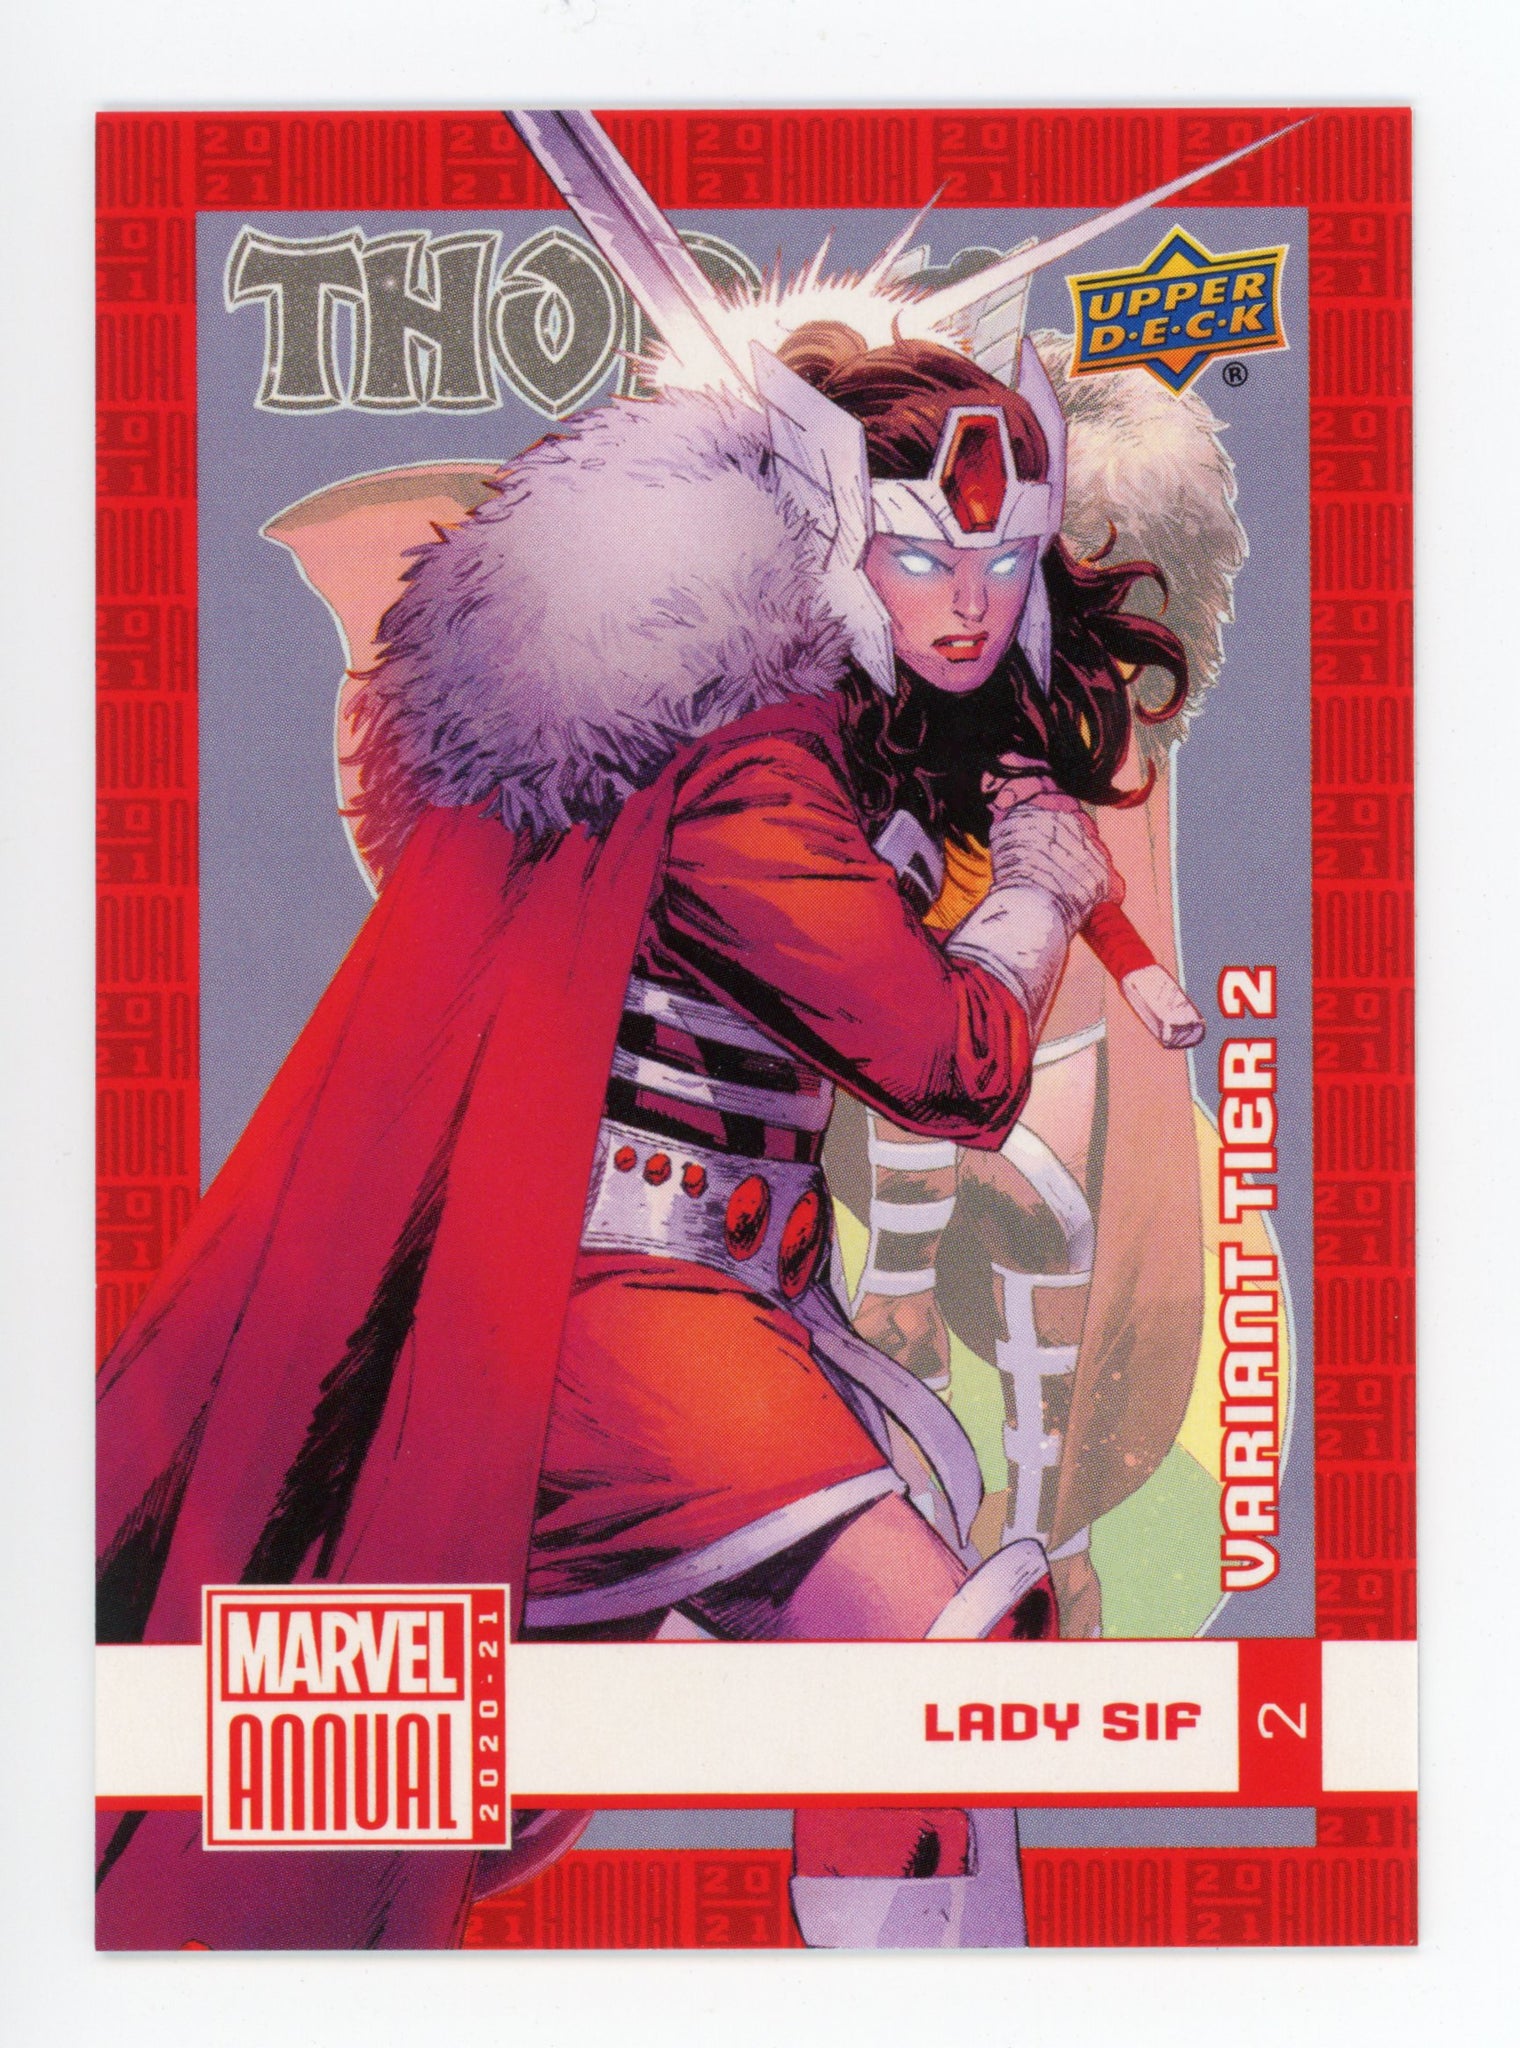 2020-2021 Lady Sif Variant Tier 2 Upper Deck Marvel Annual # 2